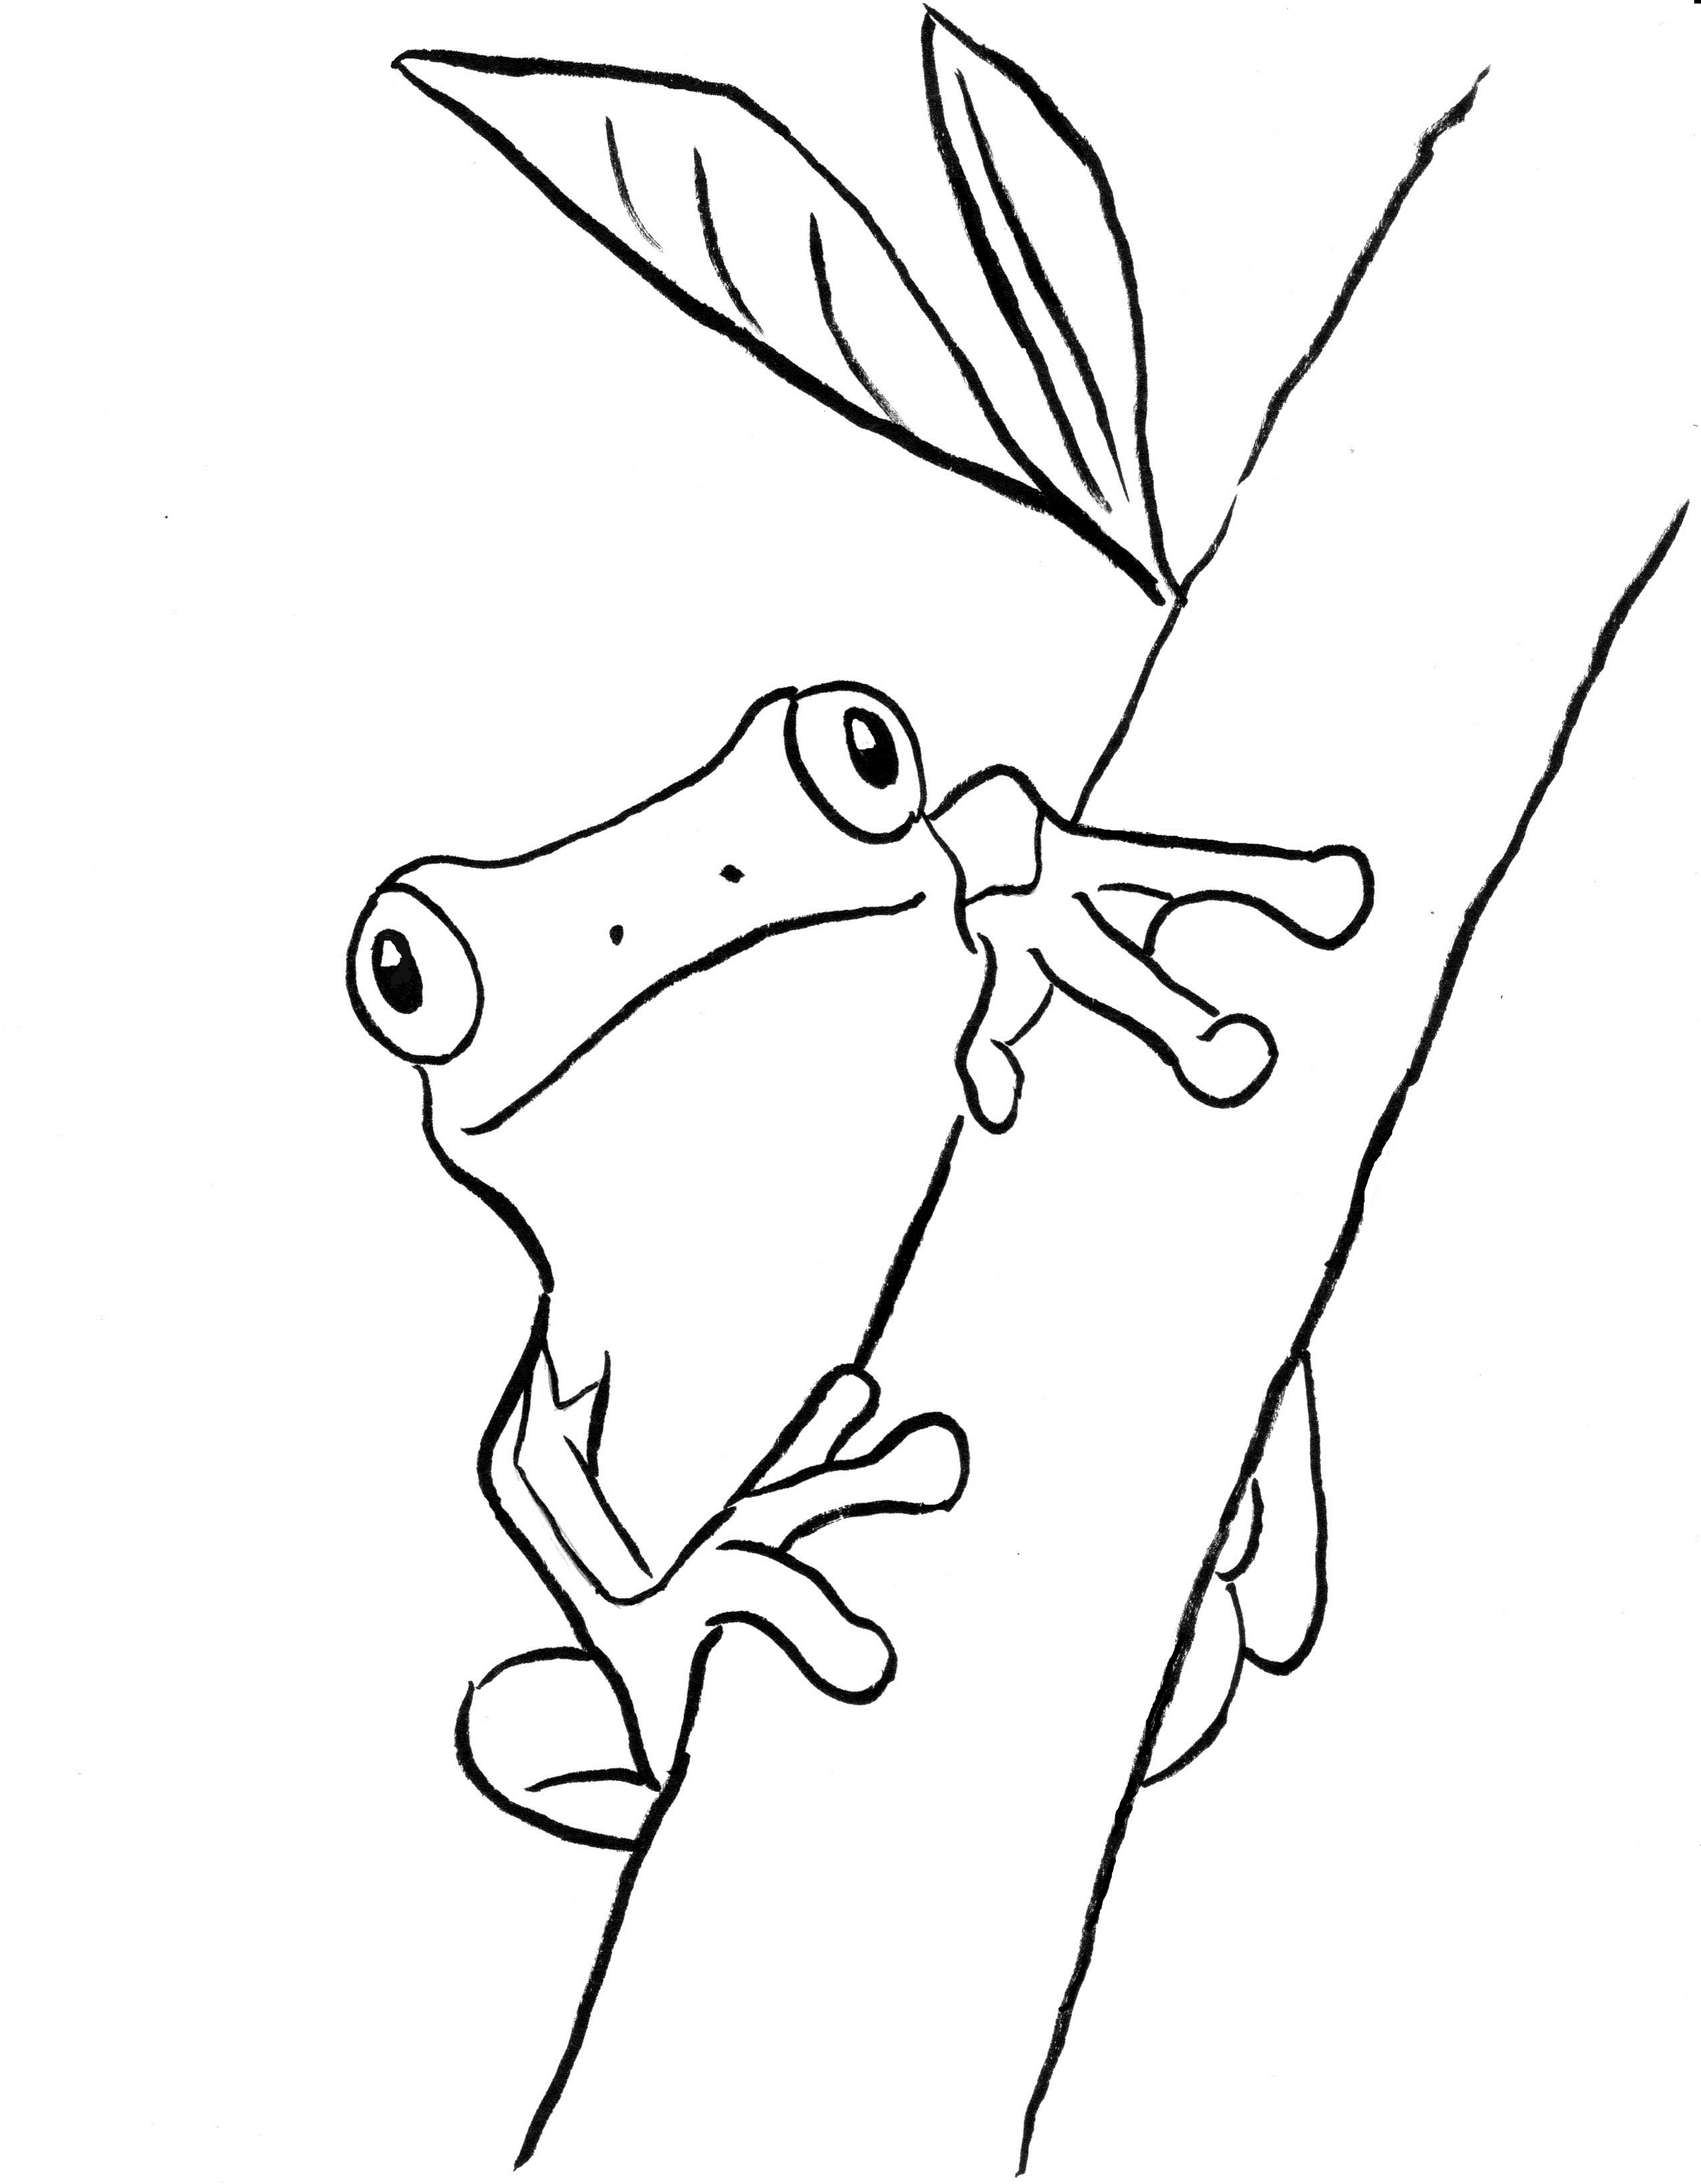 Tree Frog Coloring Page - Samantha Bell